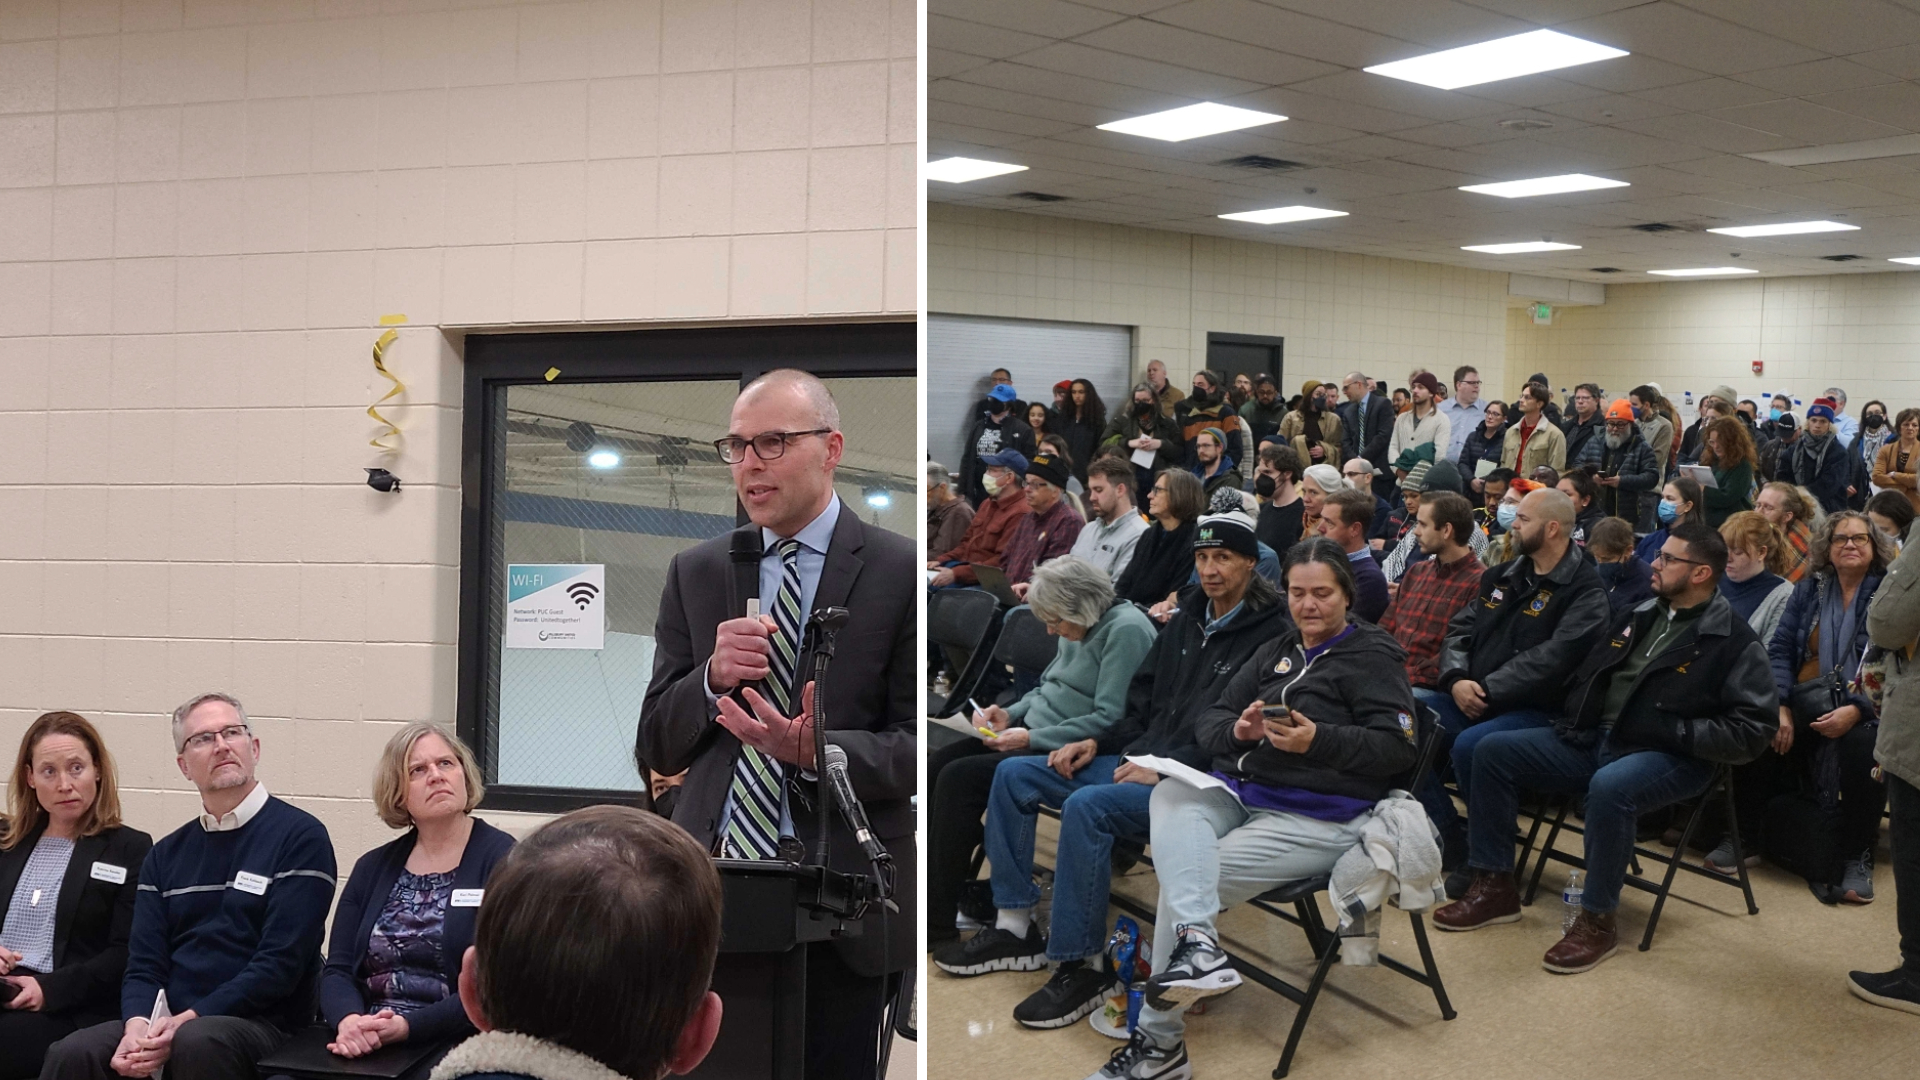 two photos from the M P C A meeting, one featuring Evan Mulholland and the other showing a large crowd